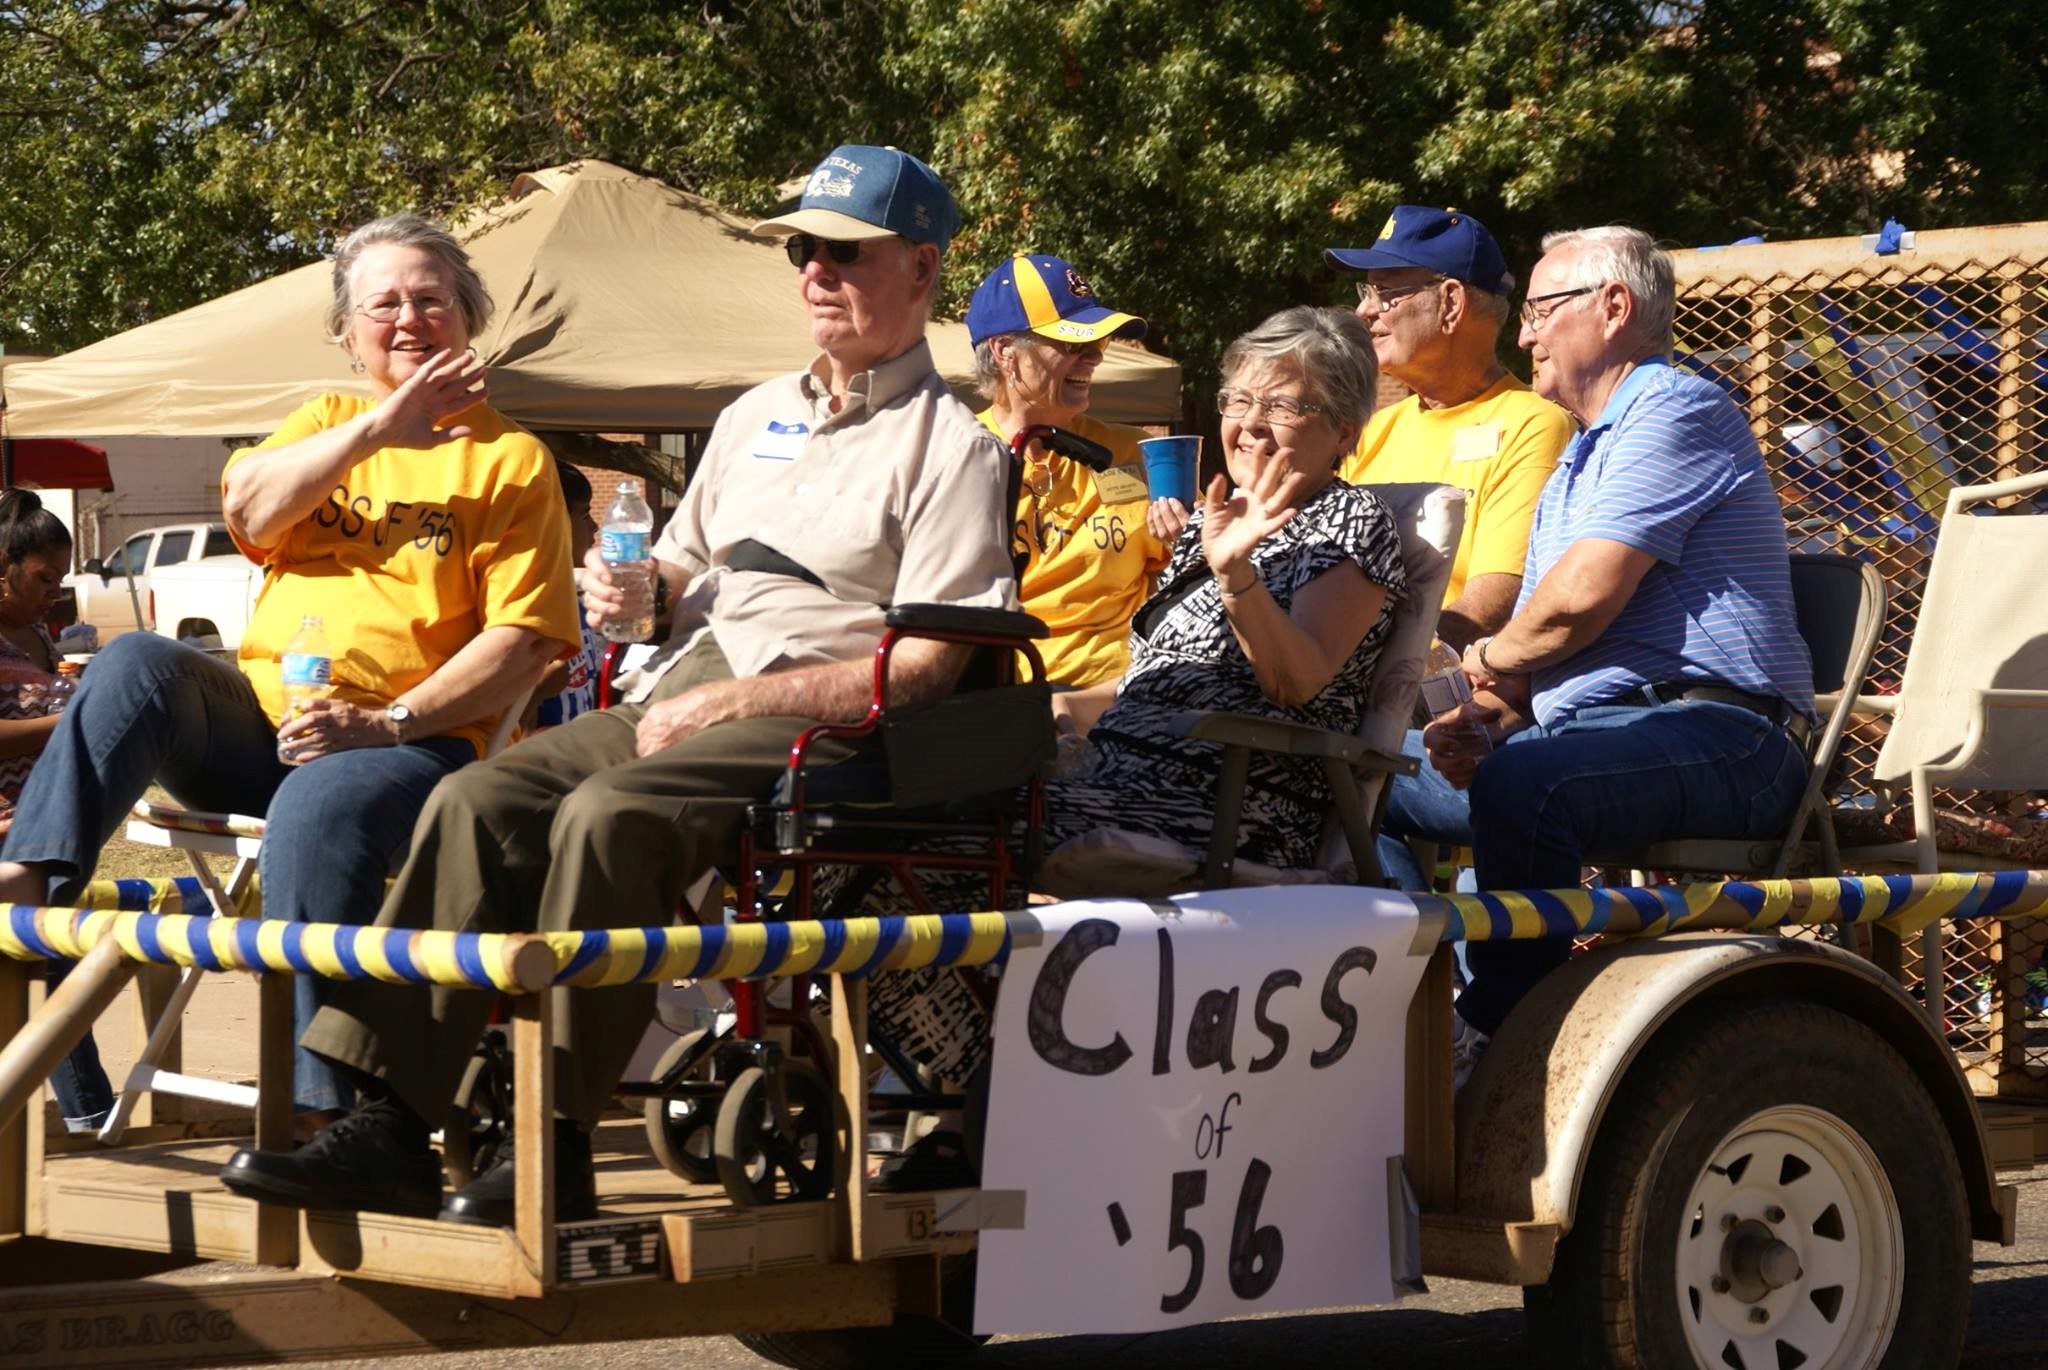 A group of people all hopped on an allegory car with the poster of "Class of '56"